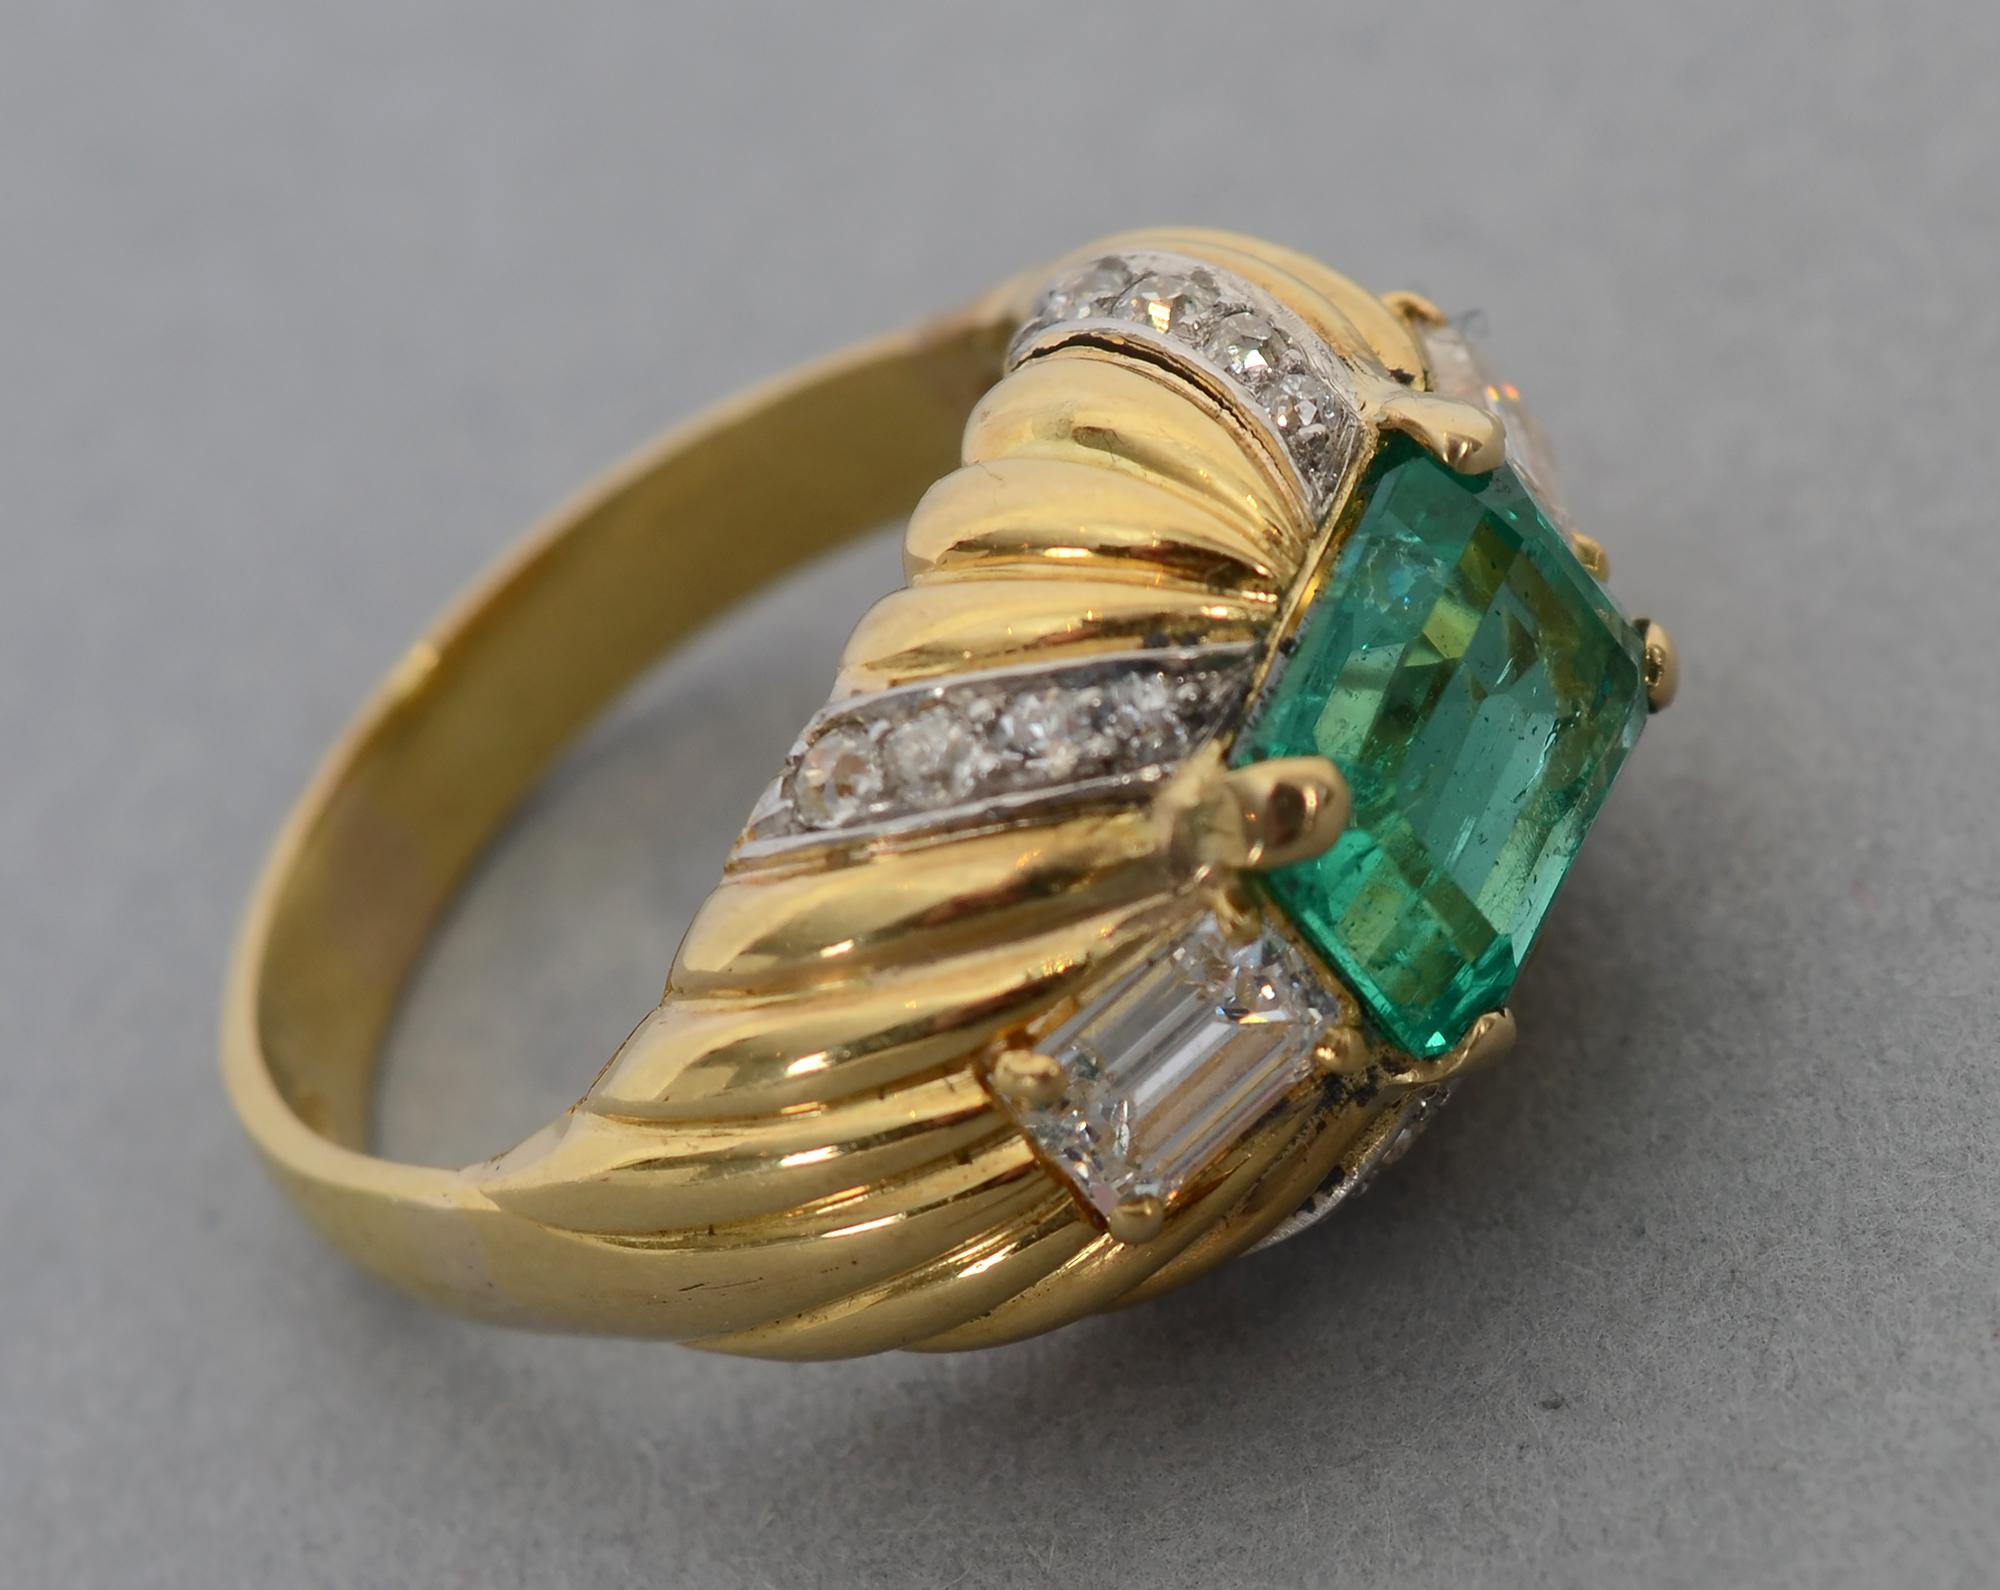 Stunning emerald and diamond ring set in 18 karat gold. The central stone is an octagonal 2.56 carat Colombian emerald; no heat as GIA tested.  The stone measures 9.68 x 7.62 x 4.66 mm. On either side is an octagonal diamond weighing approximately